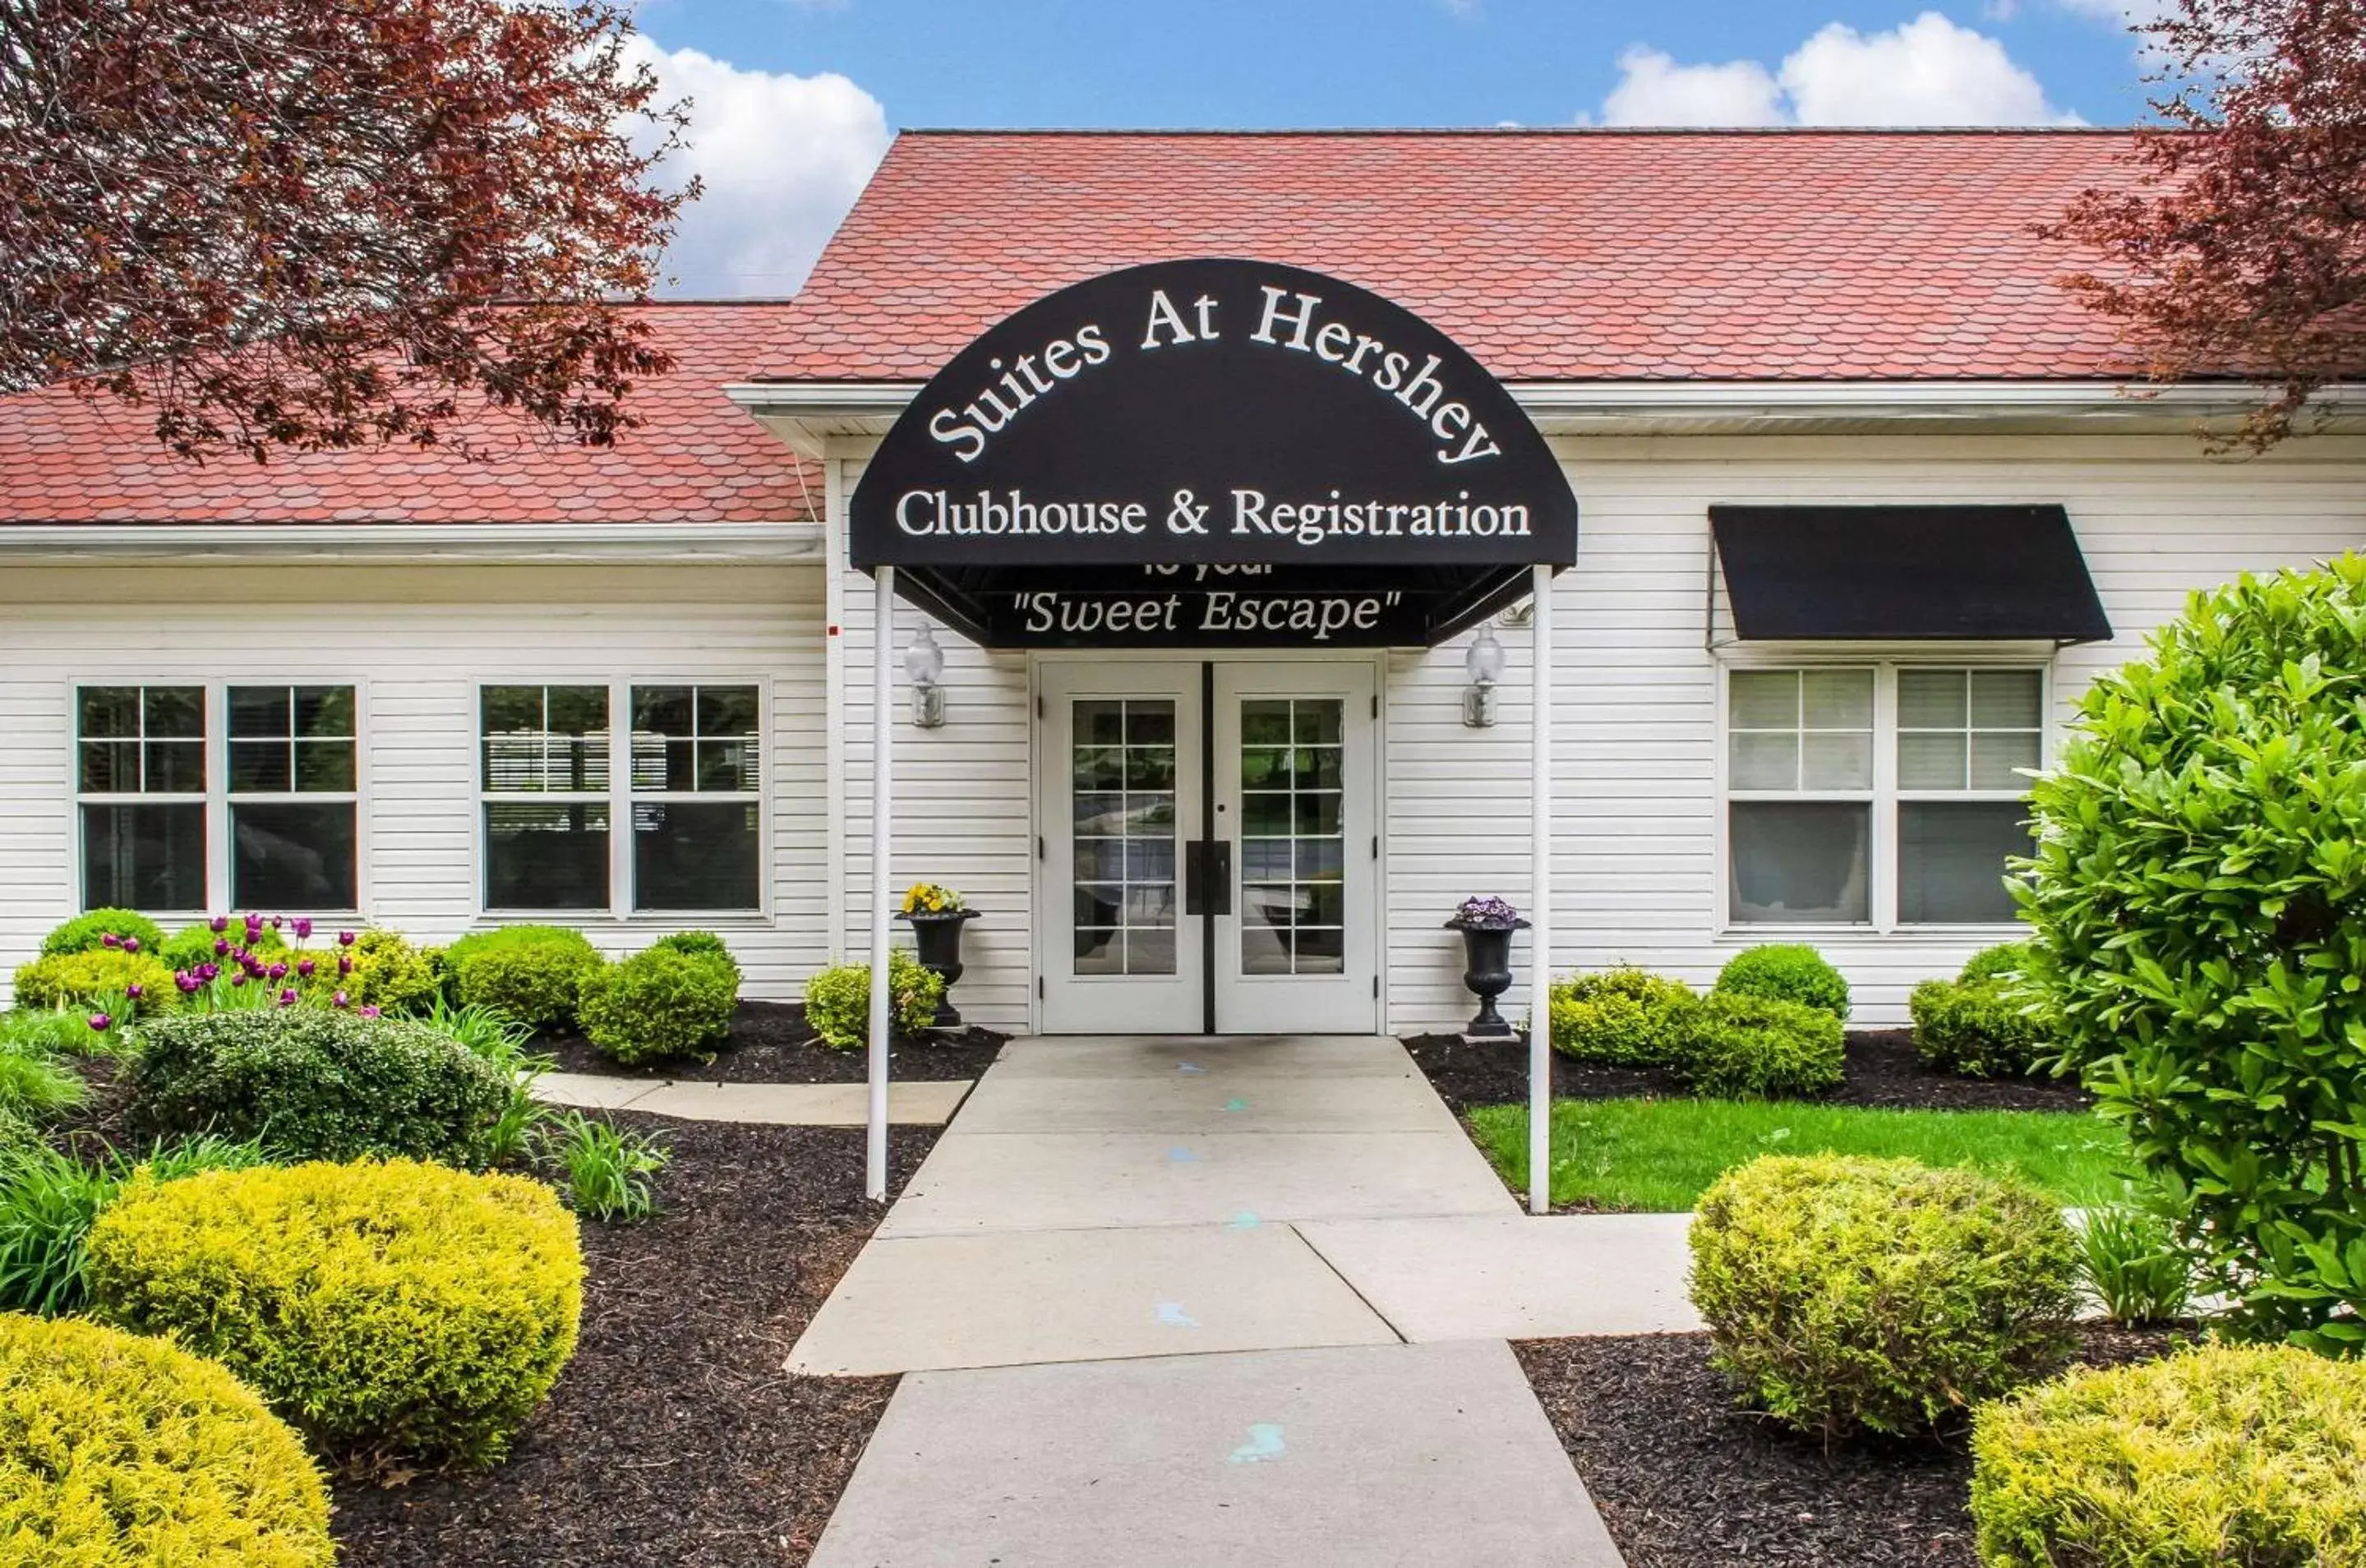 Property Building in Bluegreen Vacations Suites at Hershey